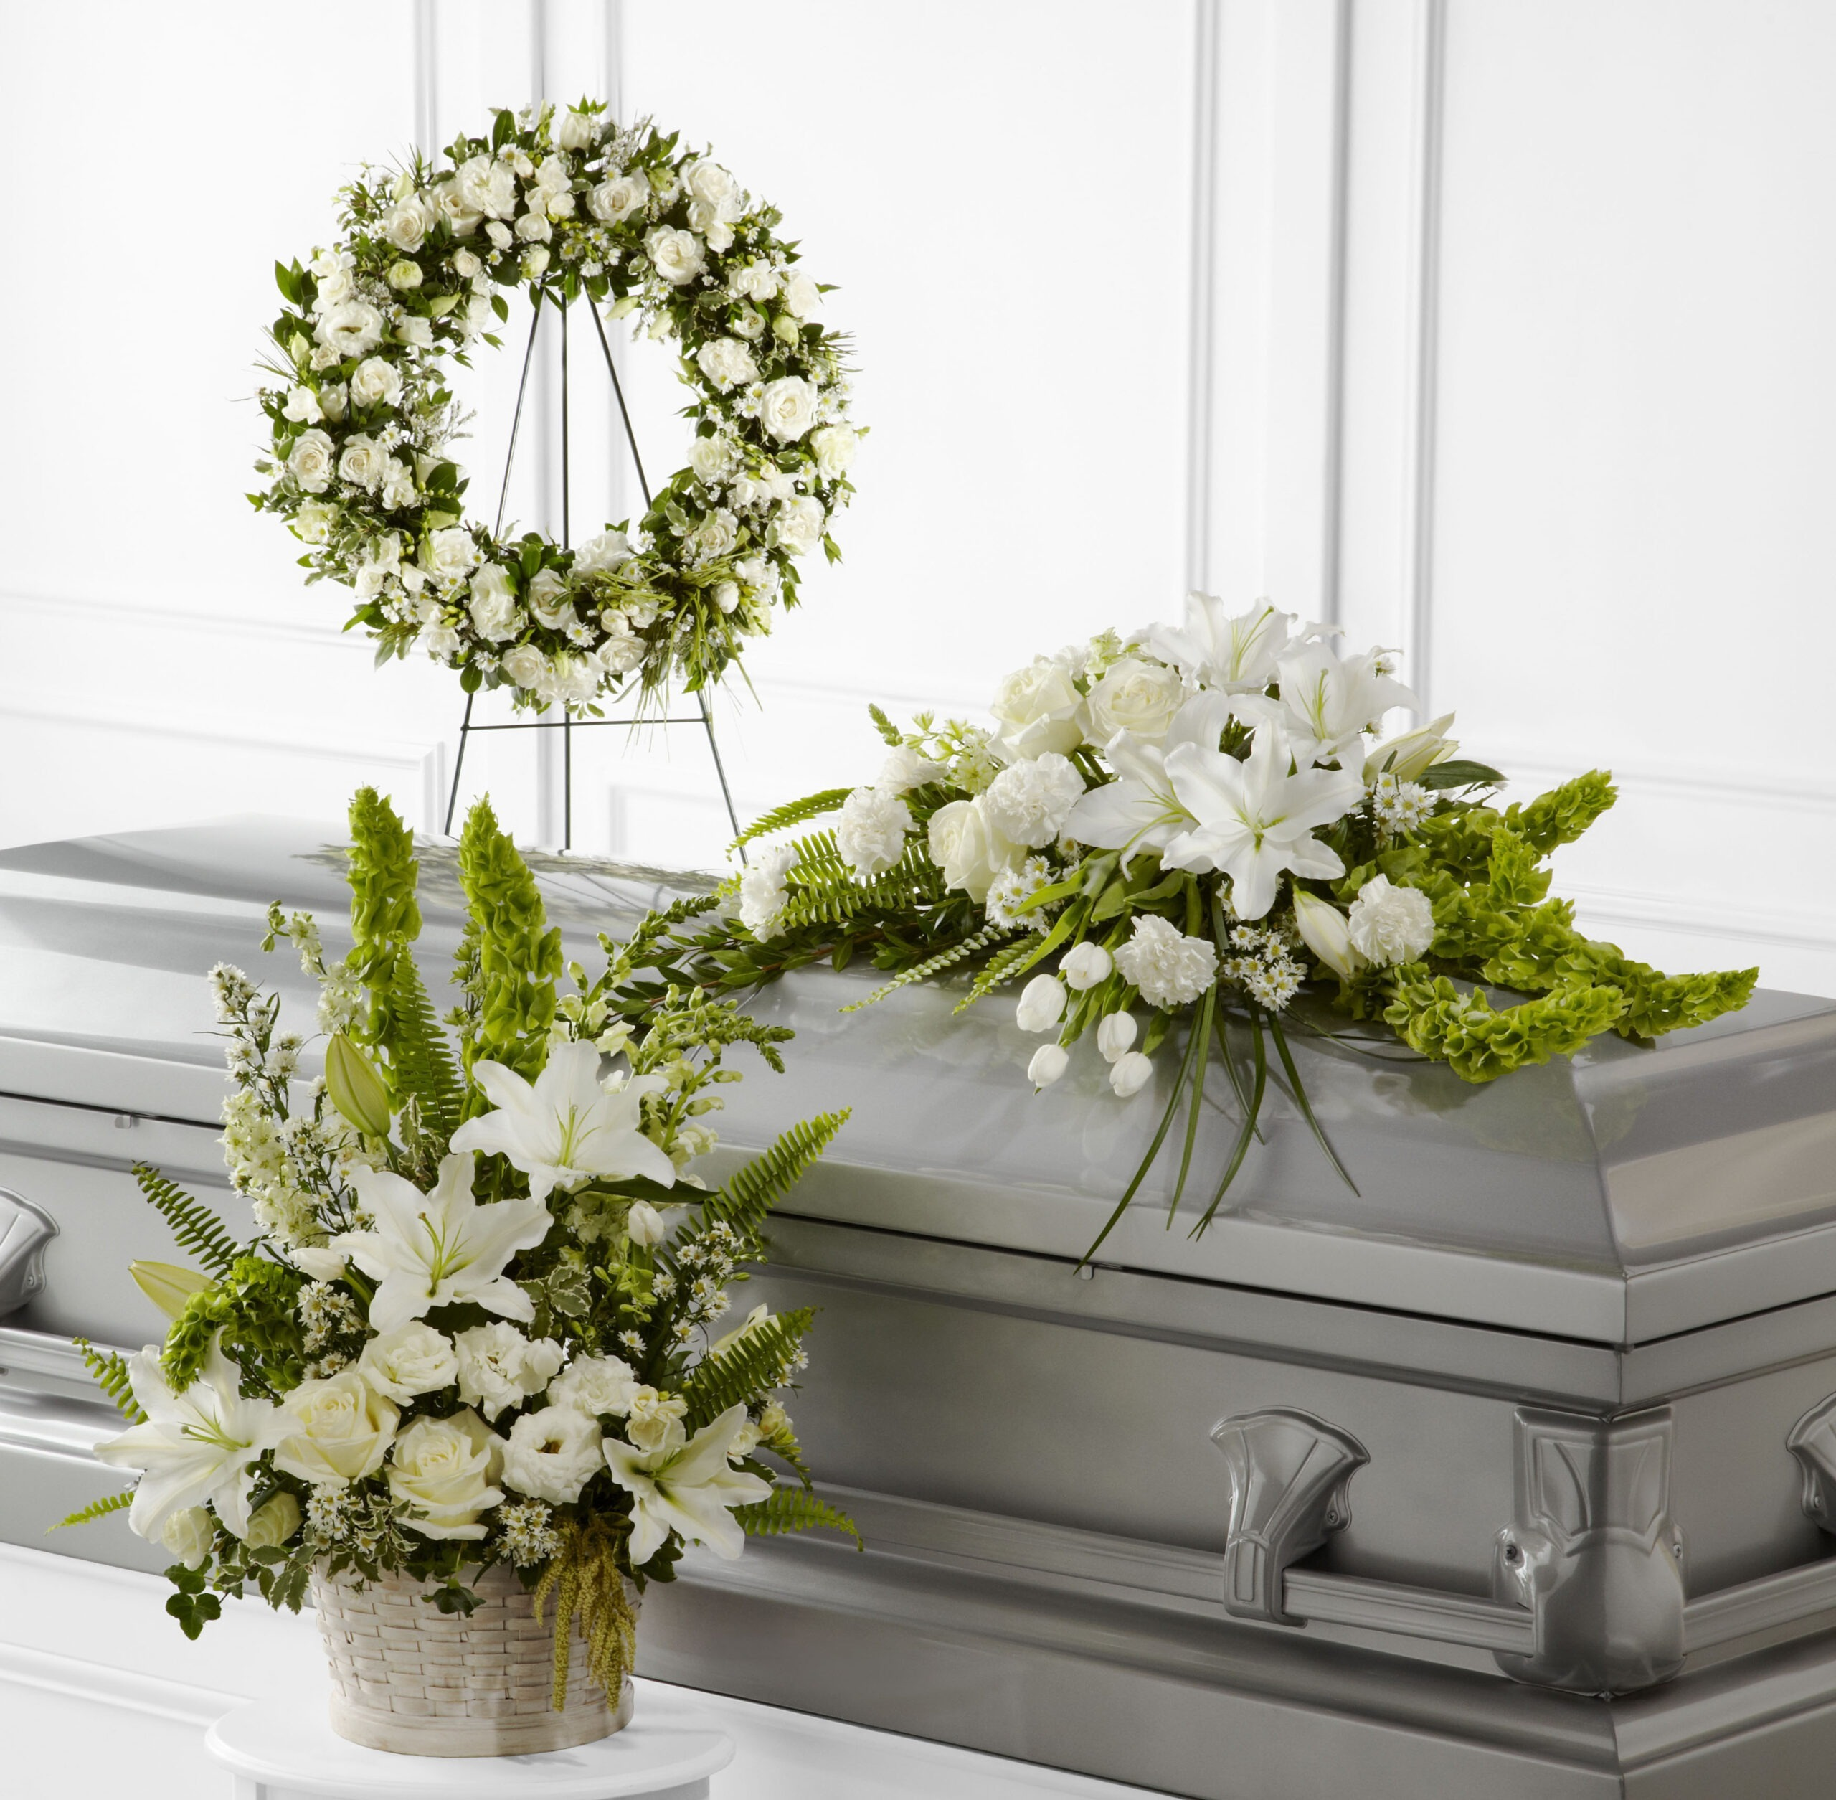 Funeral Casket Covers